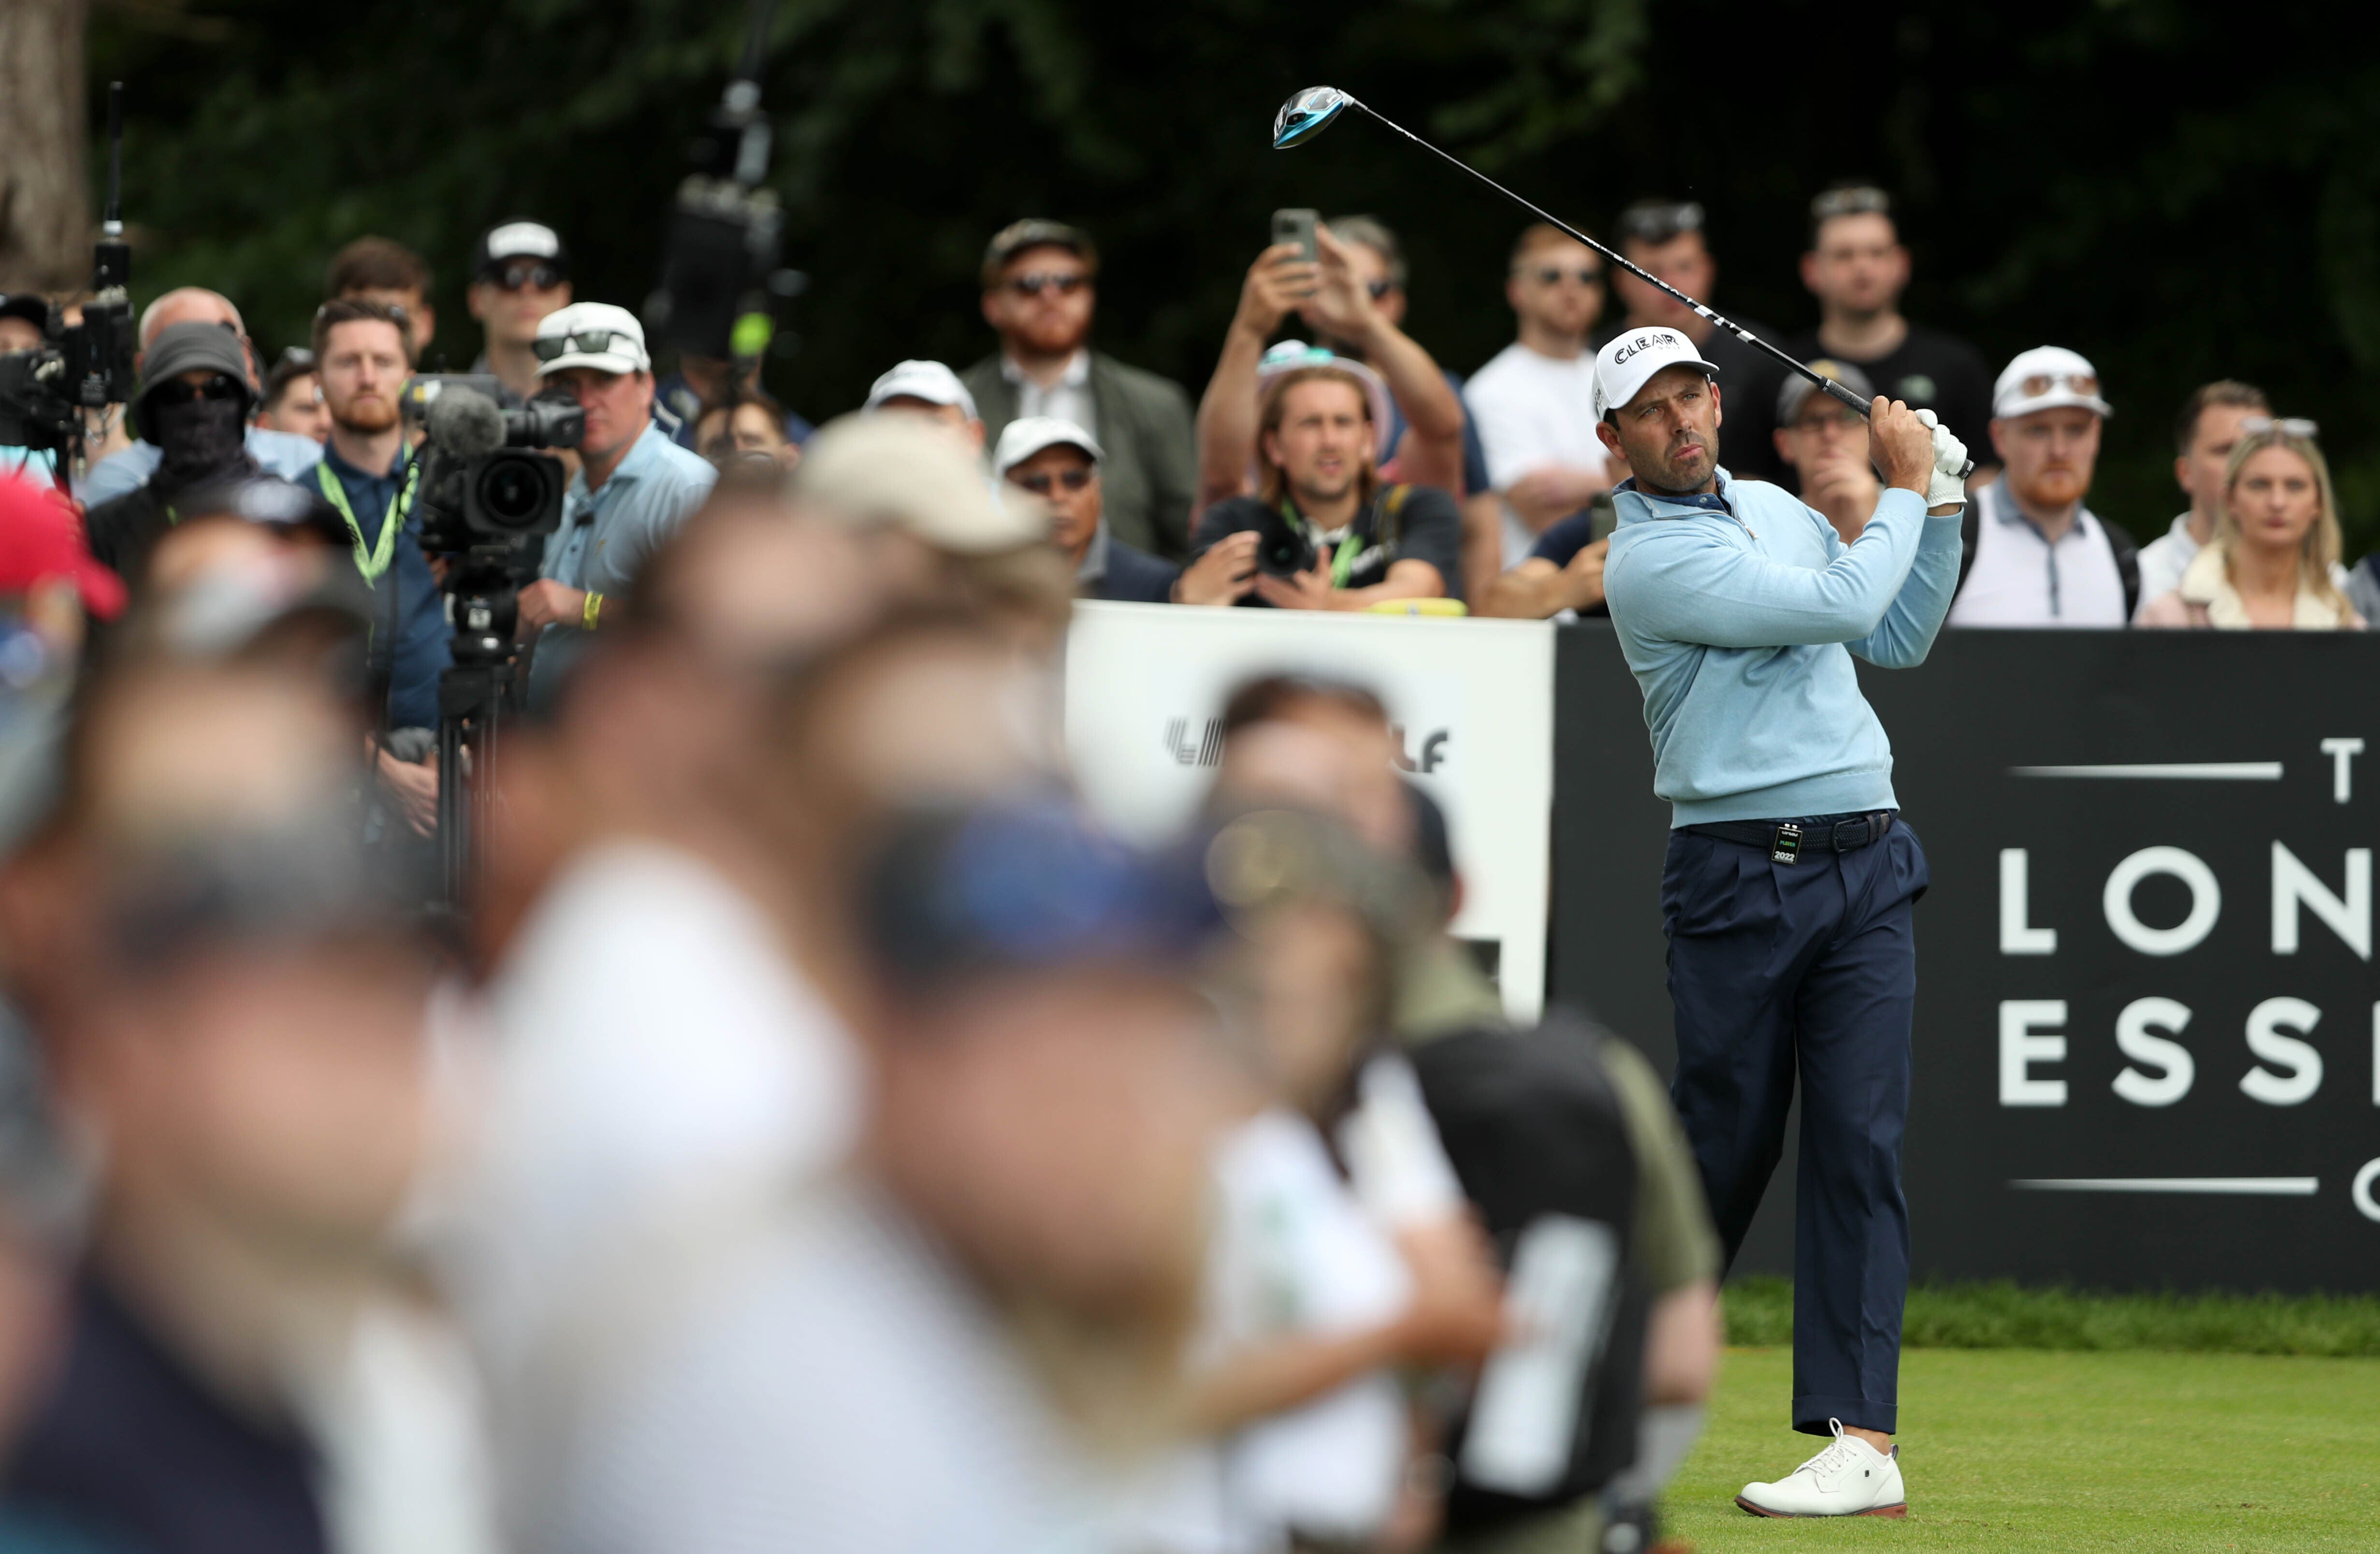 South Africa’s Charl Schwartzel tees off on the 3rd hole during day three of the LIV Golf Invitational Series at the Centurion Club (Kieran Cleeves/PA)